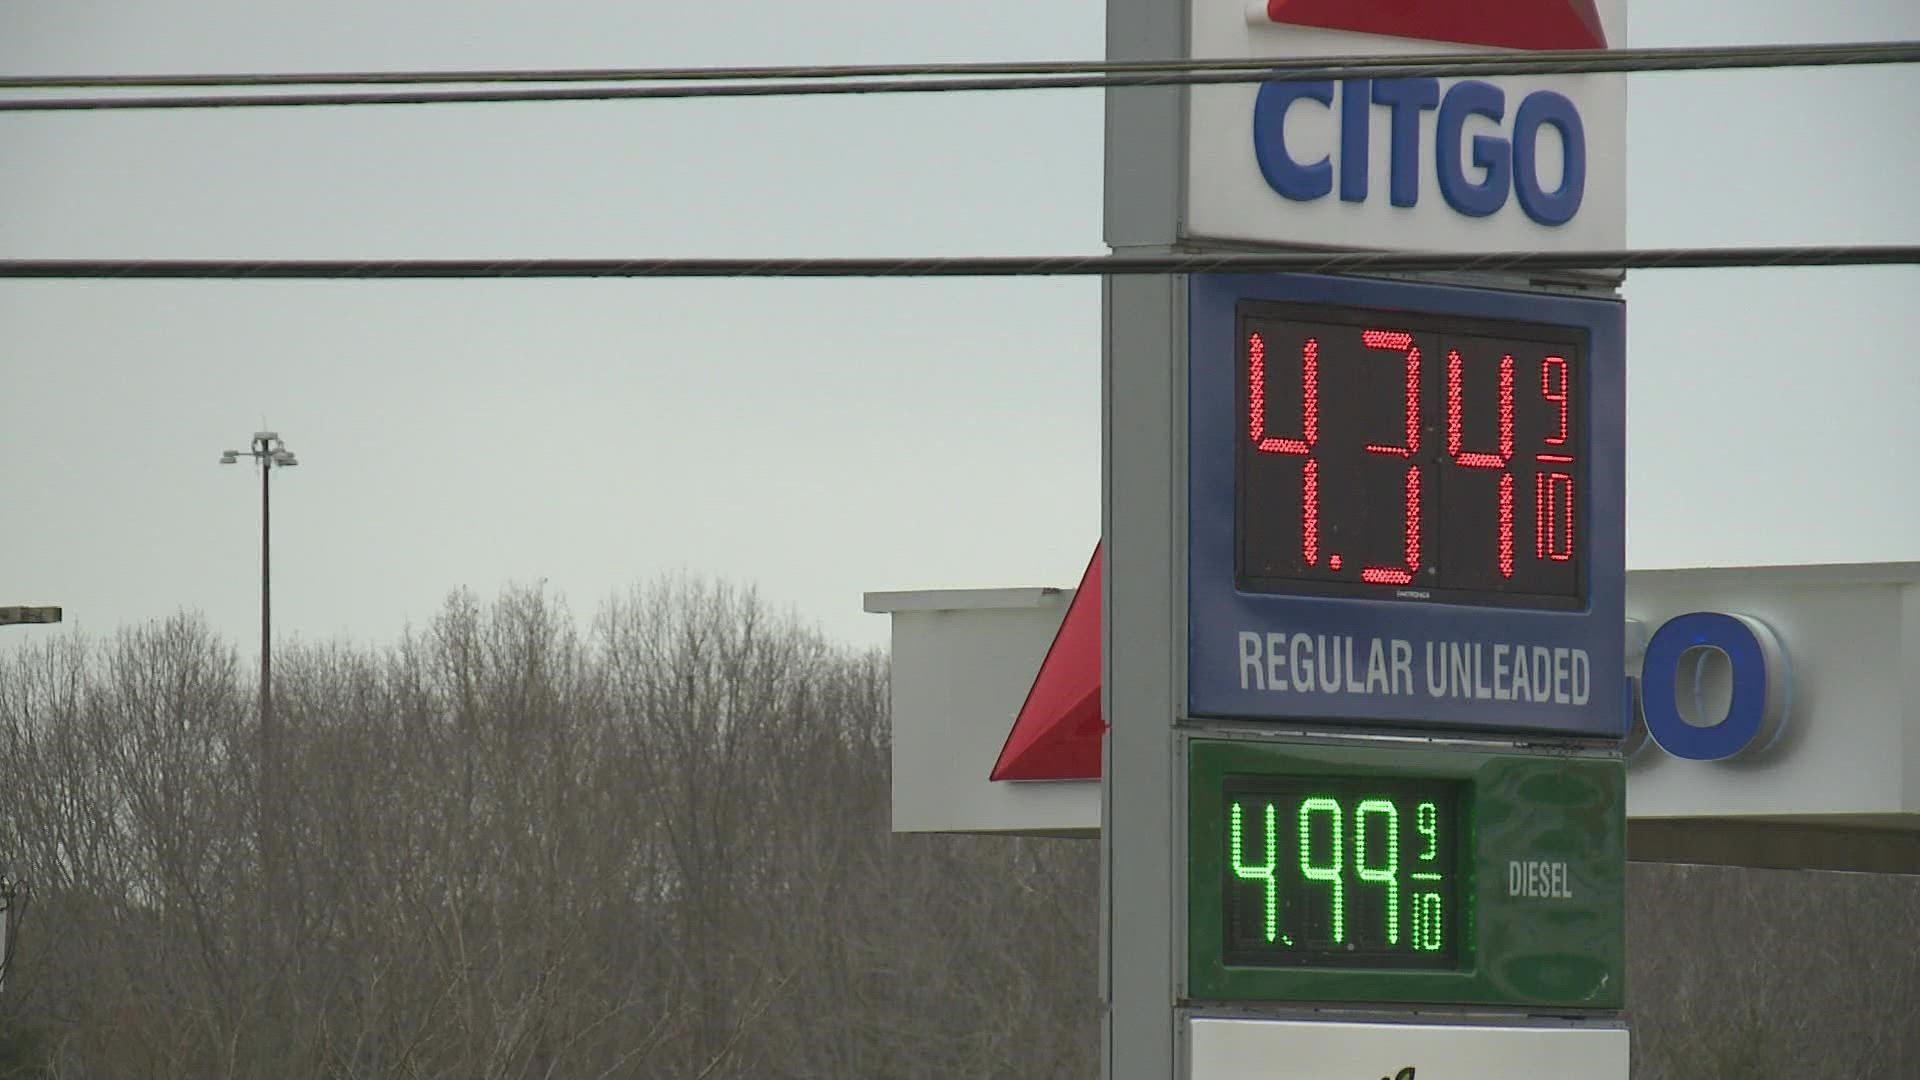 A Maine lawmaker has proposed cutting 30 cents per gallon.